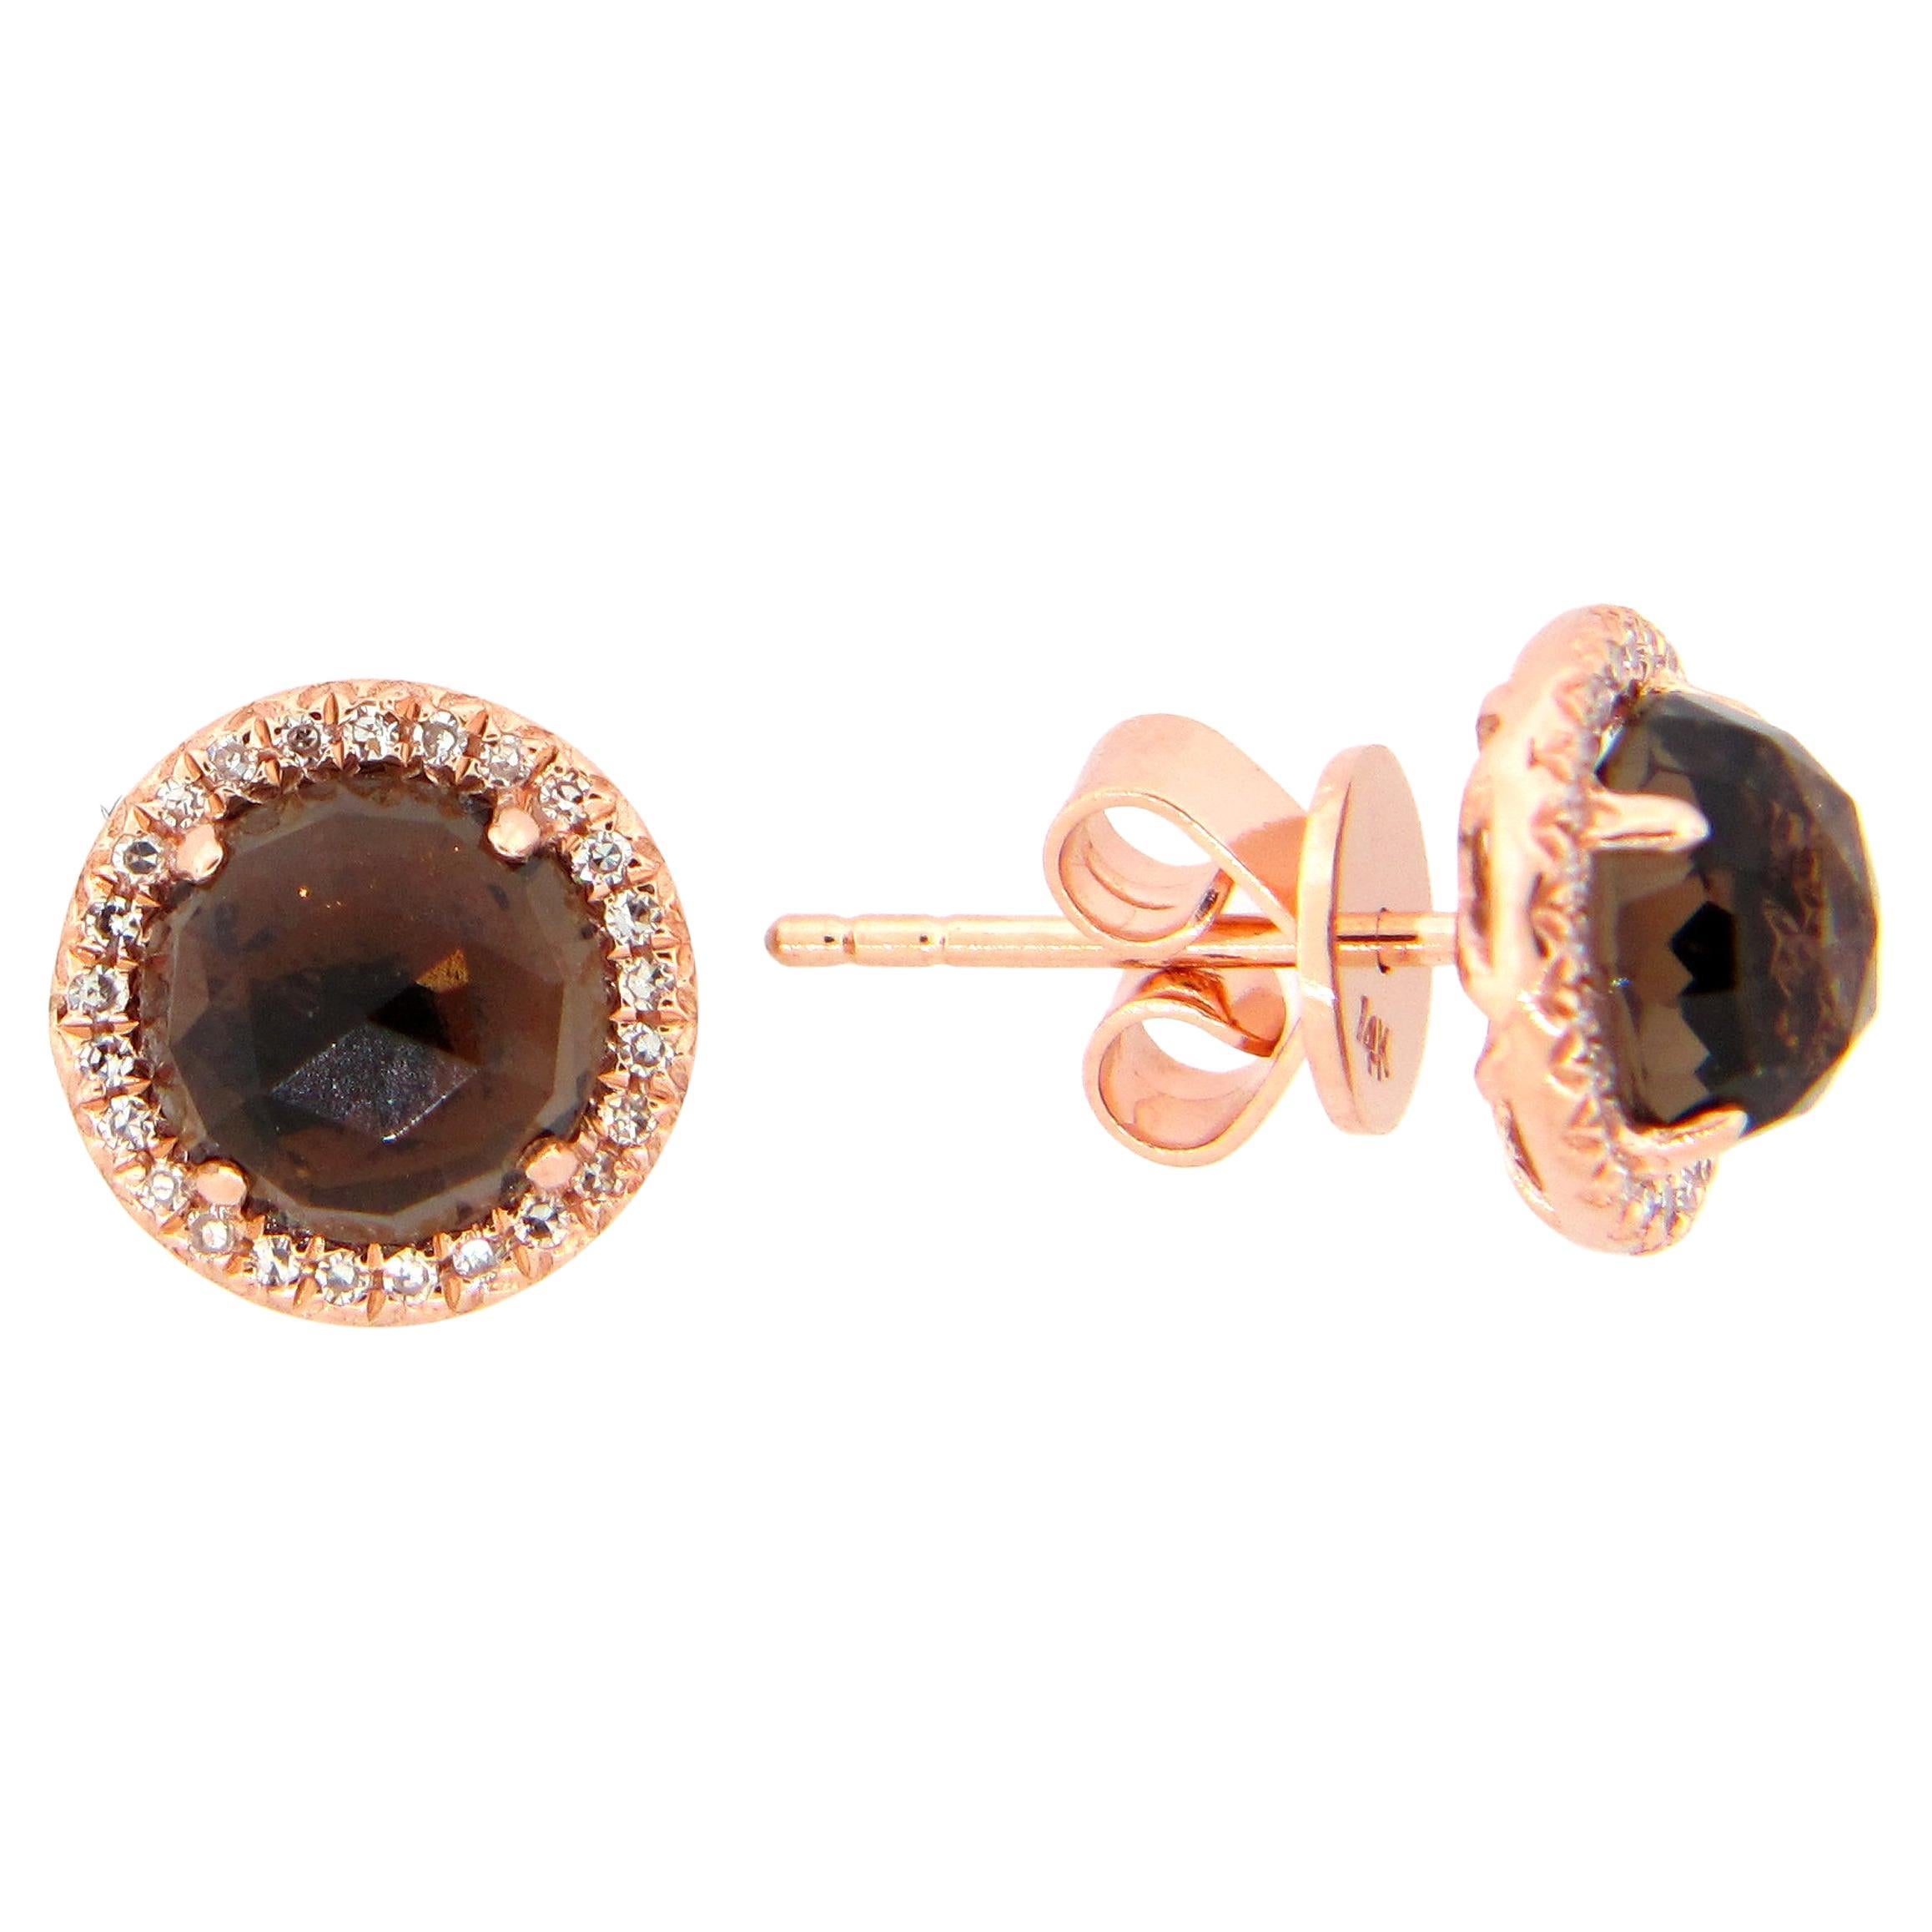 These Smokey Quartz & Diamond Earrings are a stunning and timeless accessory that can add a touch of glamour and sophistication to any outfit. 

These earrings each feature a 1.14 Carat Round Smokey Quartz, with a Diamond Halo comprised of 0.06